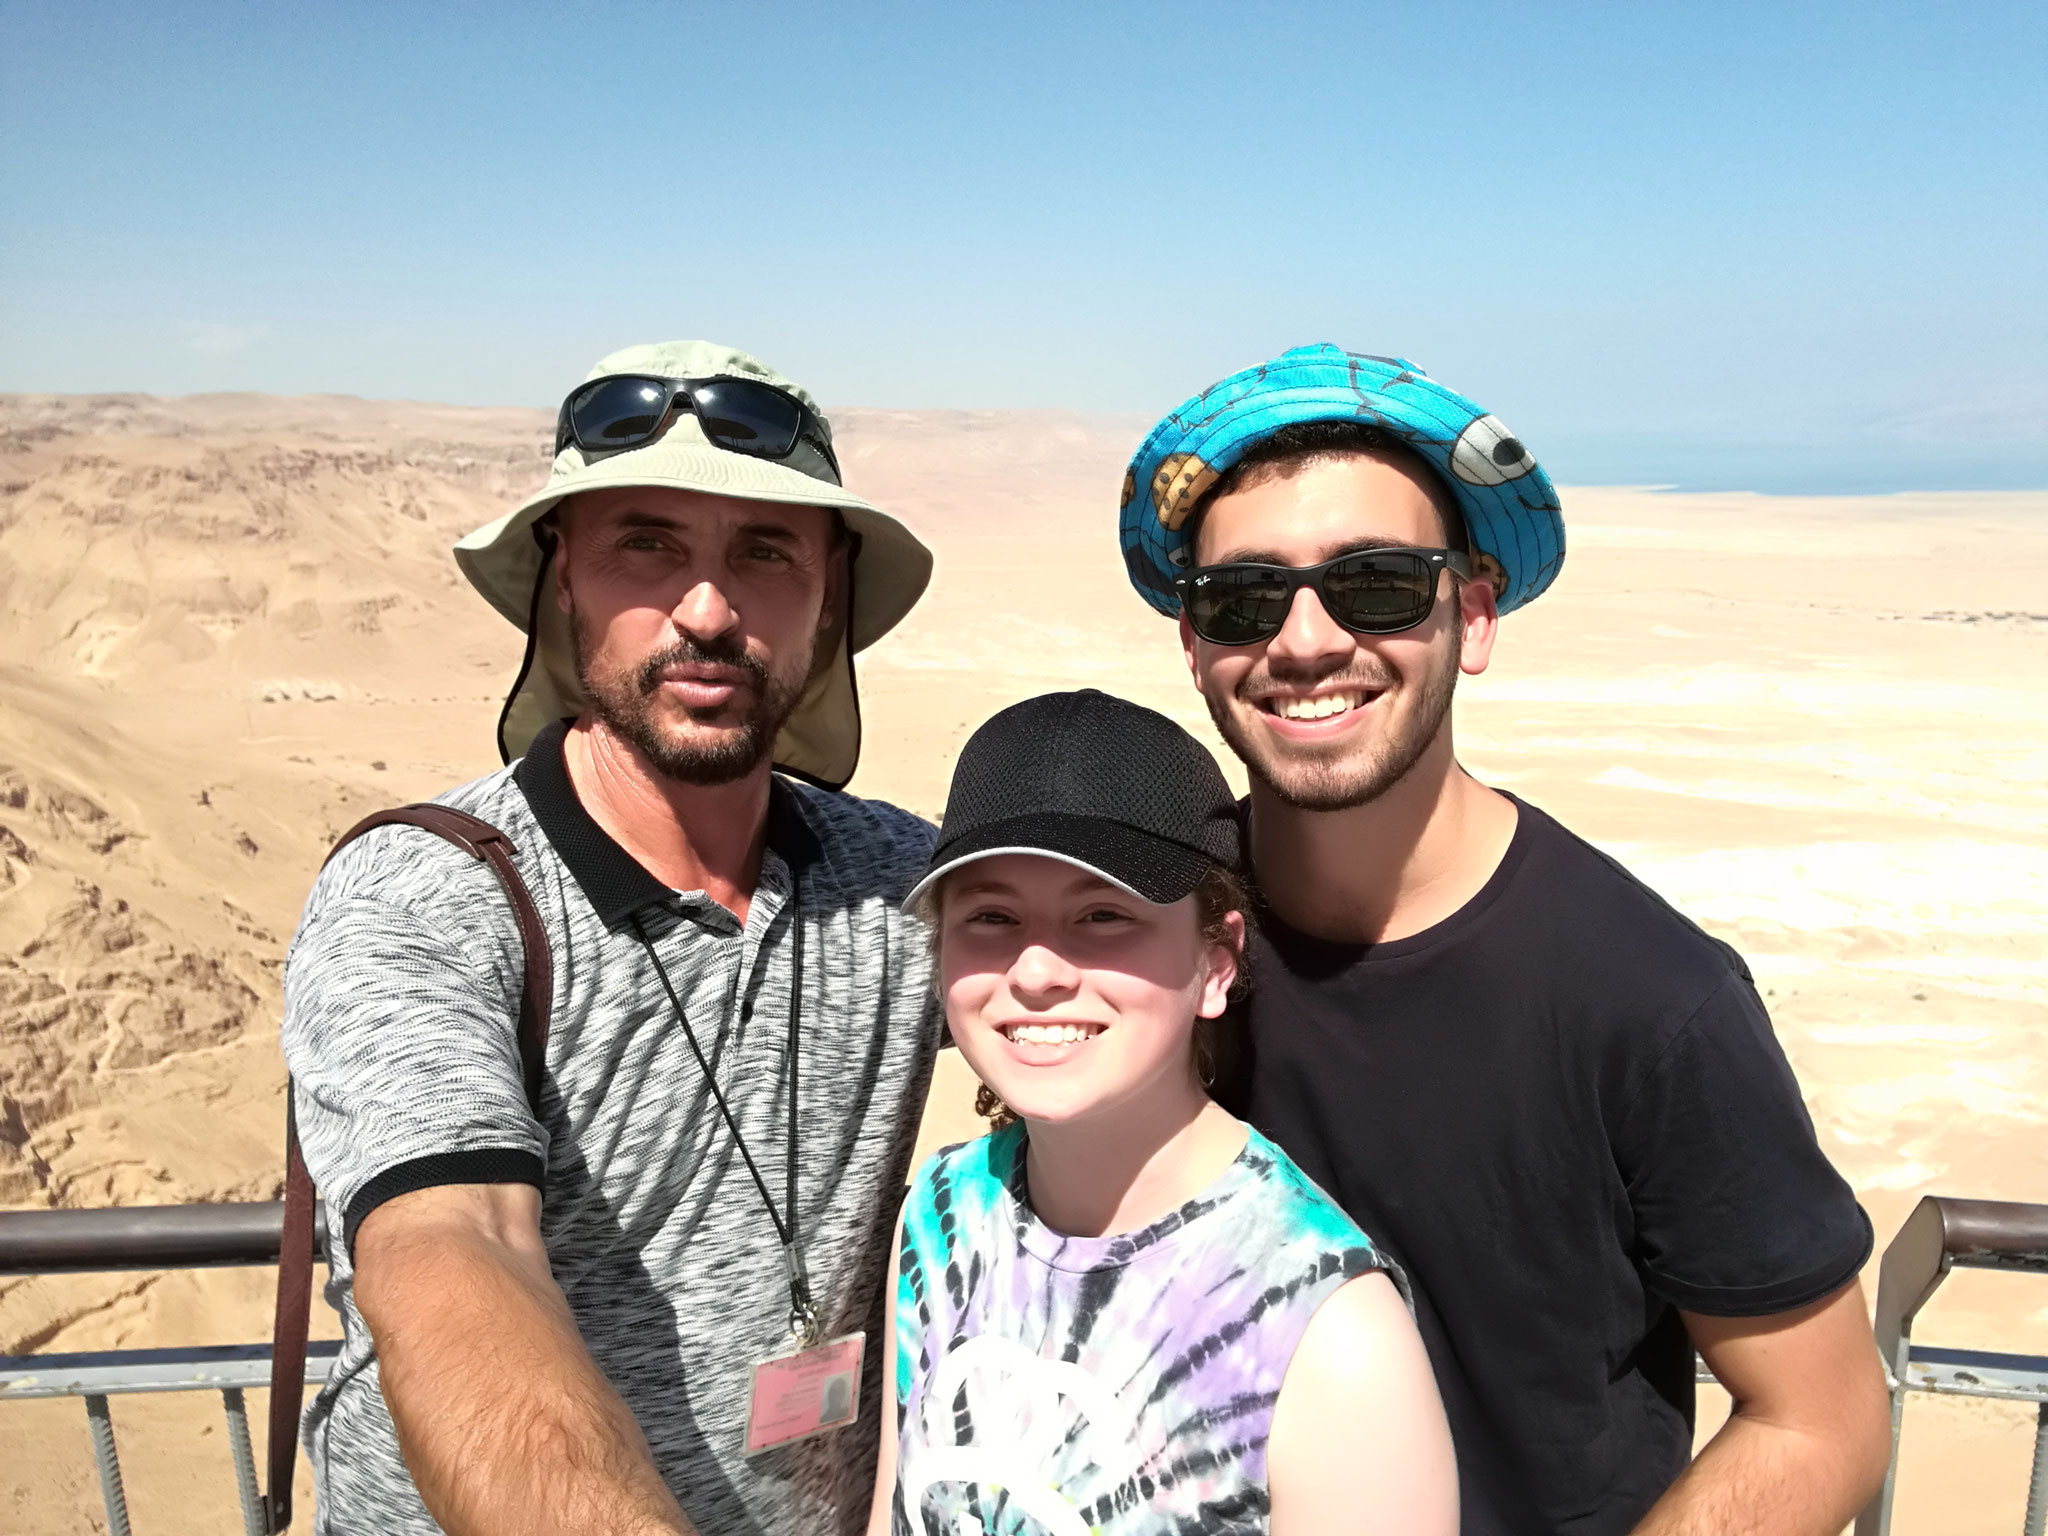 On top of Masada with Jewish American guests, 2016